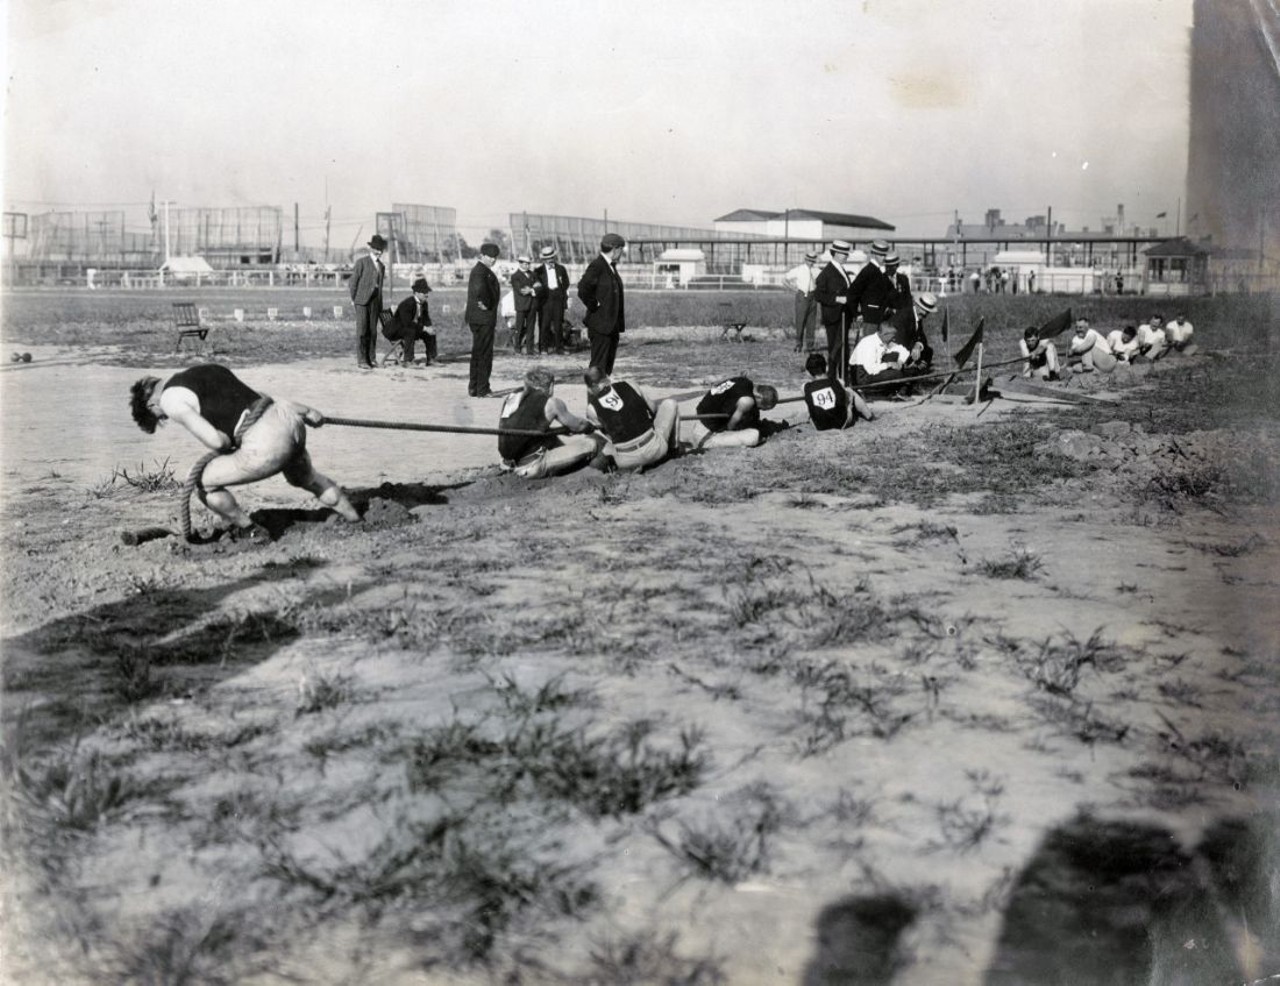 St. Louis hosted events that the games no longer consider sports.
Tug of war was one such event. In 1920, the Olympic committee got rid of tug of war and 33 other events. The 1904 Olympics also introduced new sports into the games, such as boxing.